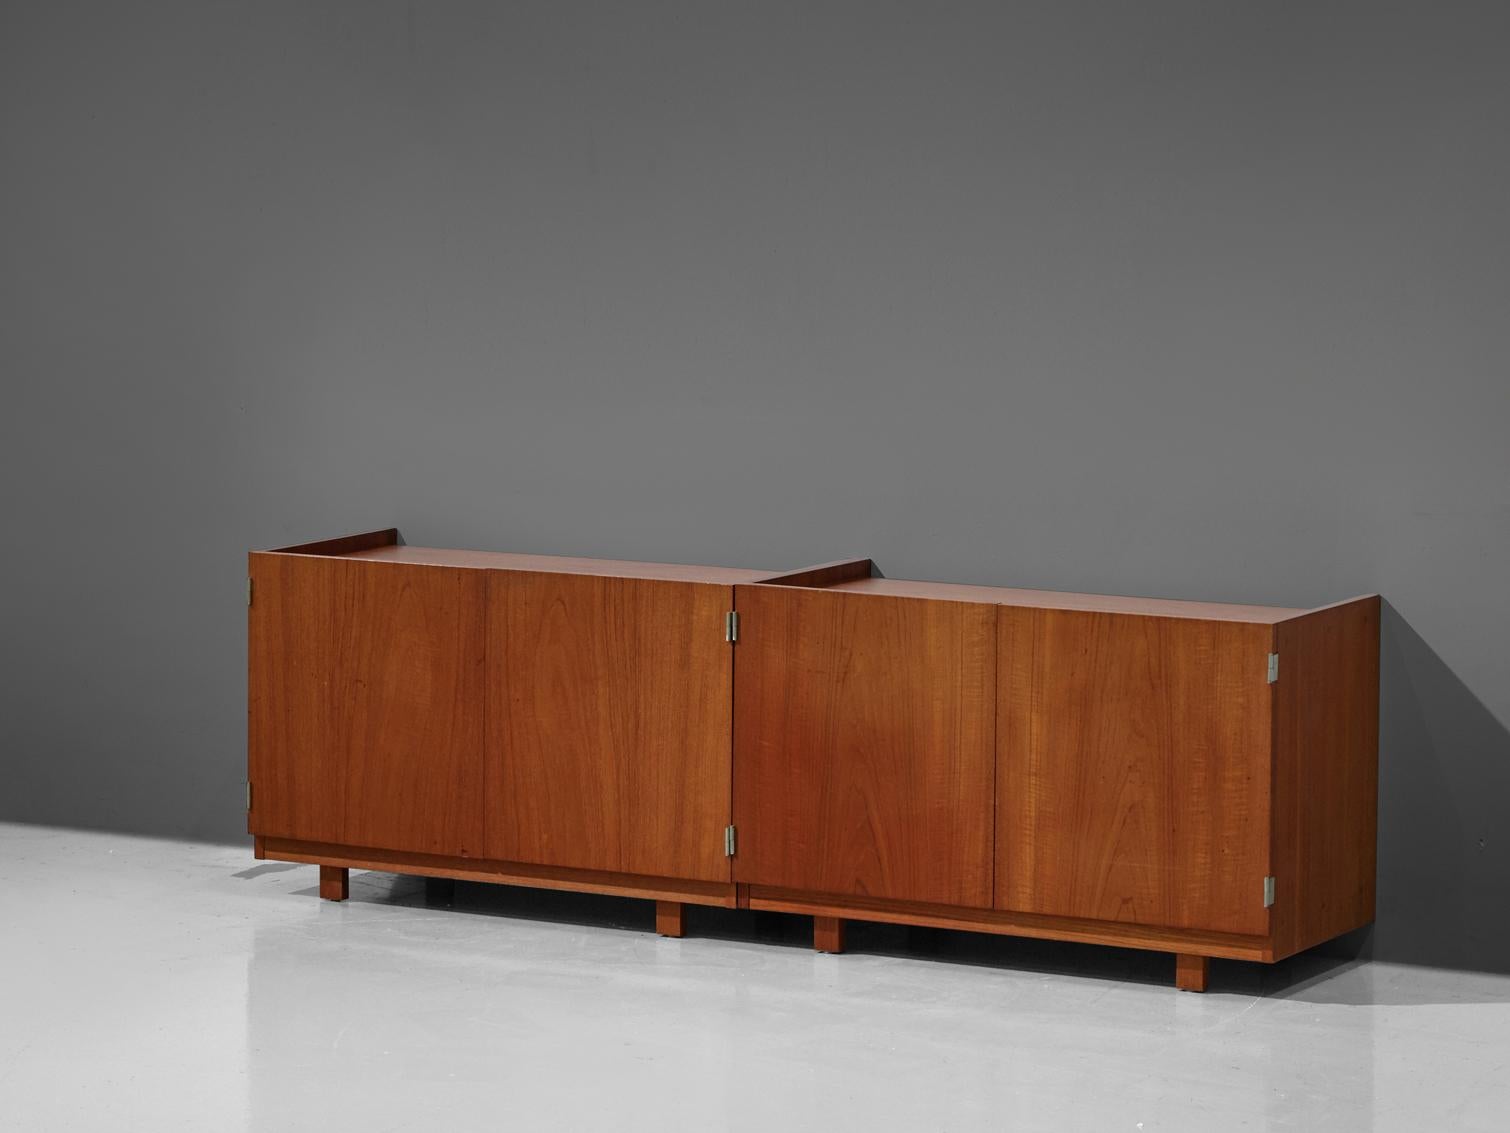 Robert heritage, pair of cabinets, teak, United Kingdom, 1960s

This well-executed set by Robert Heritage holds an utterly well-balanced construction embracing a great sense of proportions. The style is characterized by simplified lines and sharp